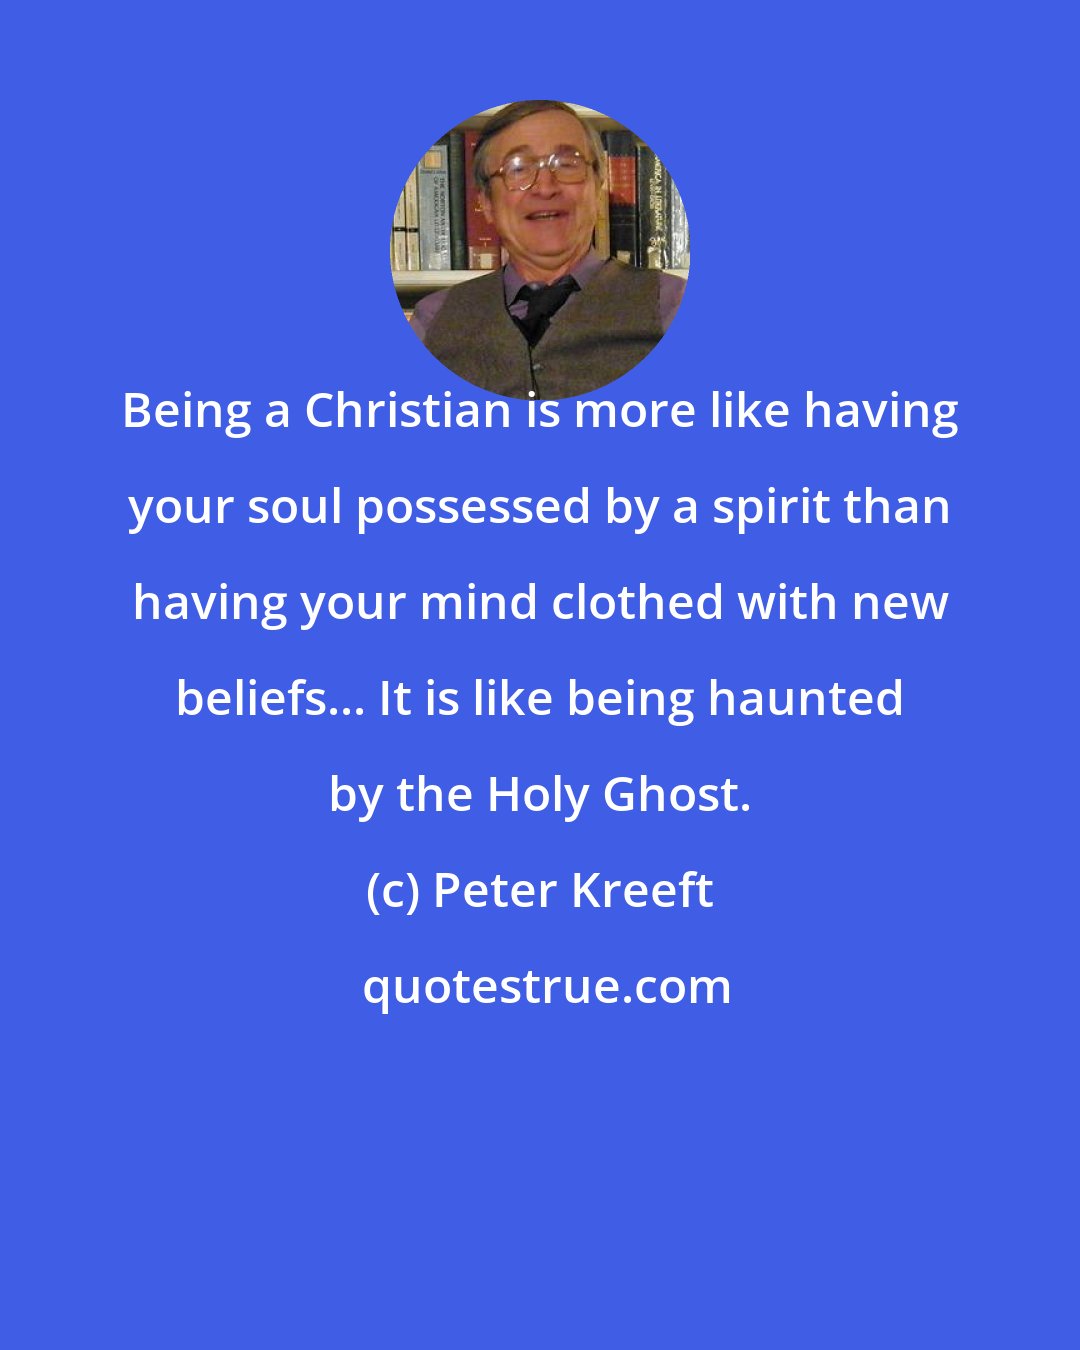 Peter Kreeft: Being a Christian is more like having your soul possessed by a spirit than having your mind clothed with new beliefs... It is like being haunted by the Holy Ghost.